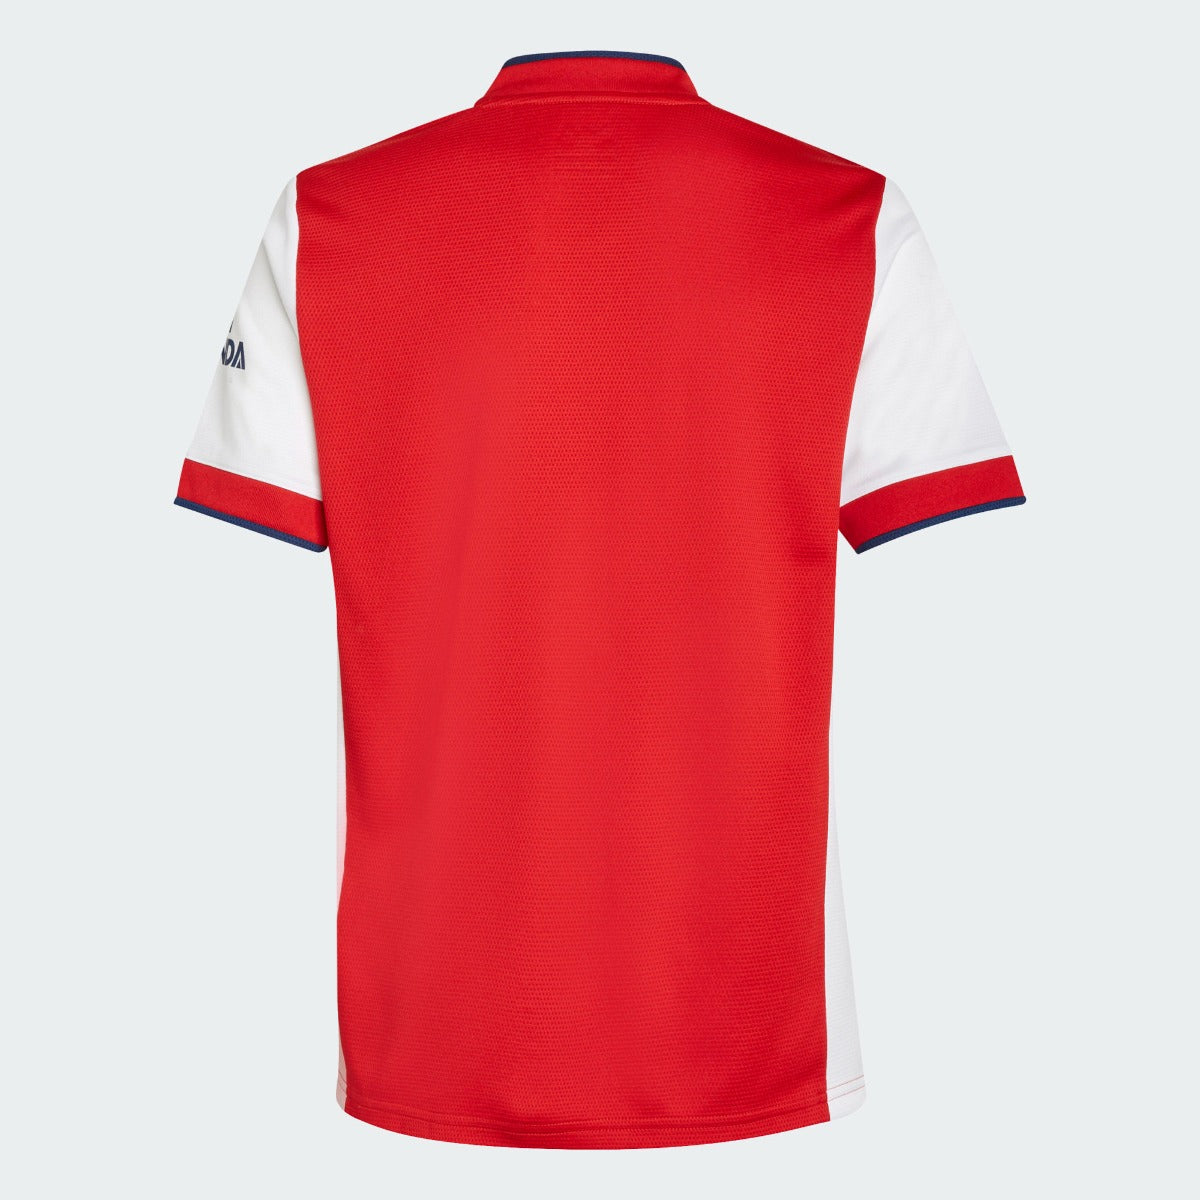 Adidas 2021-22 Arsenal Youth Home Jersey - Scarlet-White (Back)